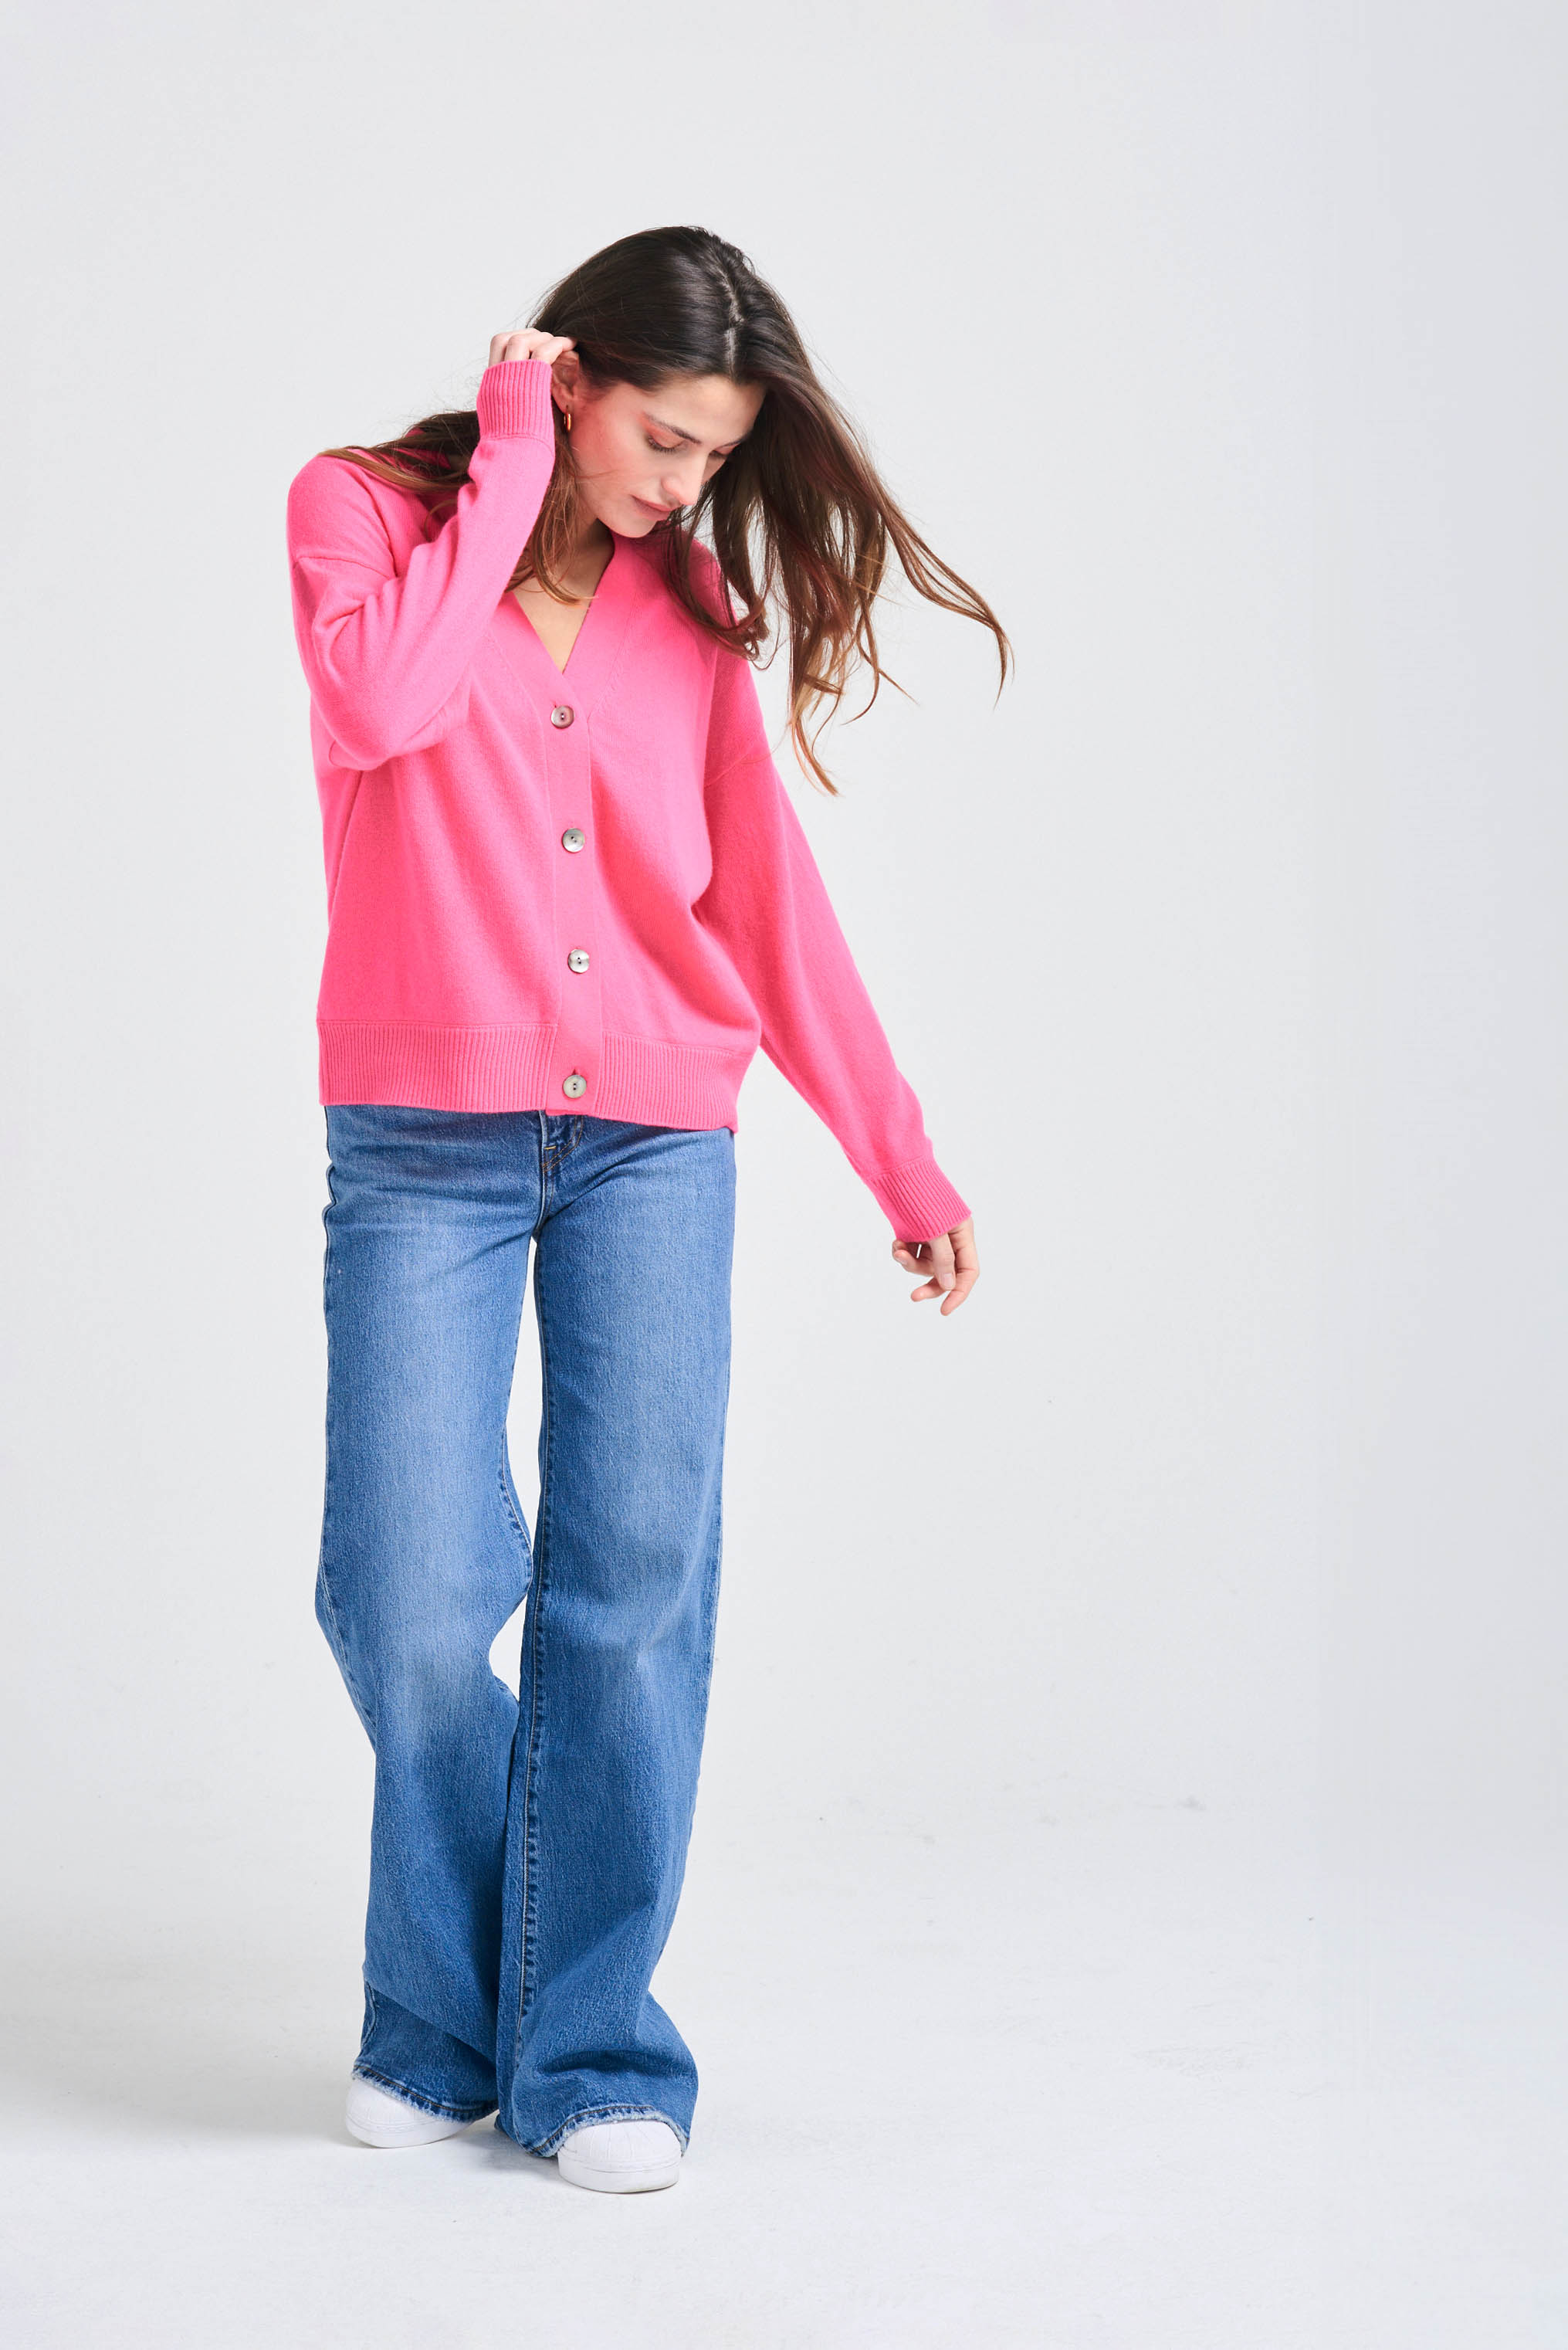 Brown haired female model wearing Jumper1234 Oversize cashmere vee neck cardigan in neon pink